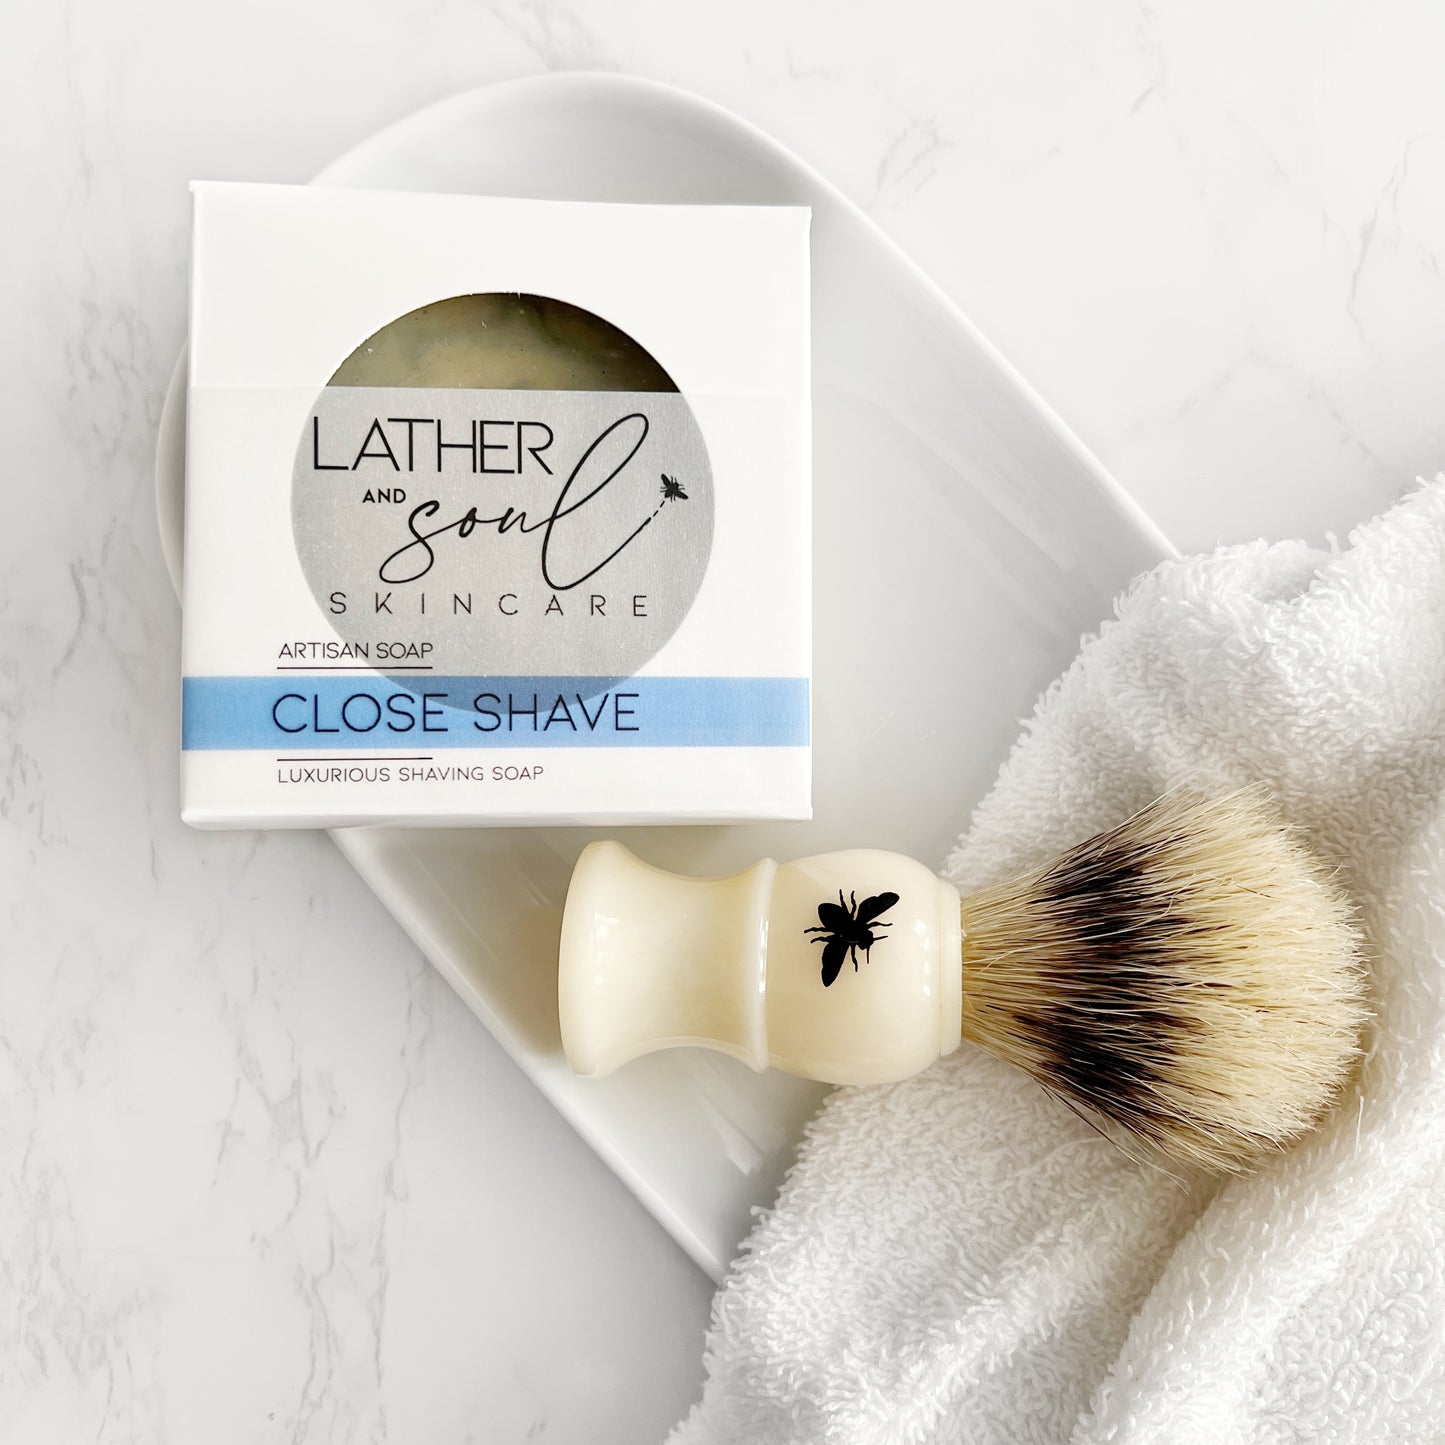 Luxurious shaving soap with organic ingredients from Lather and Soul